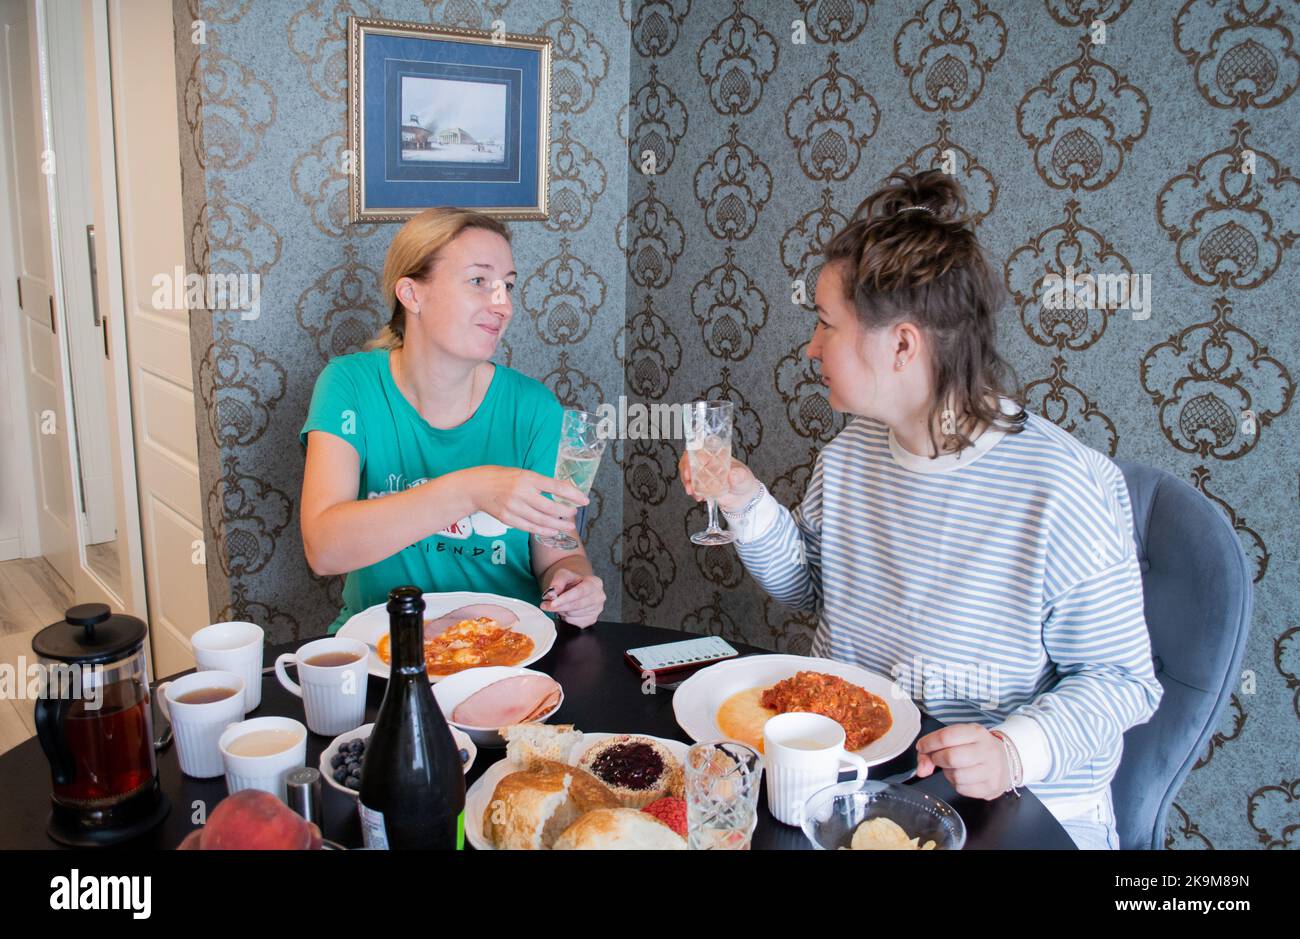 St. Petersburg, Russia, August 2021: Young women in pajamas celebrate and drink champagne in crystal glasses on the bruderschaft. Stock Photo